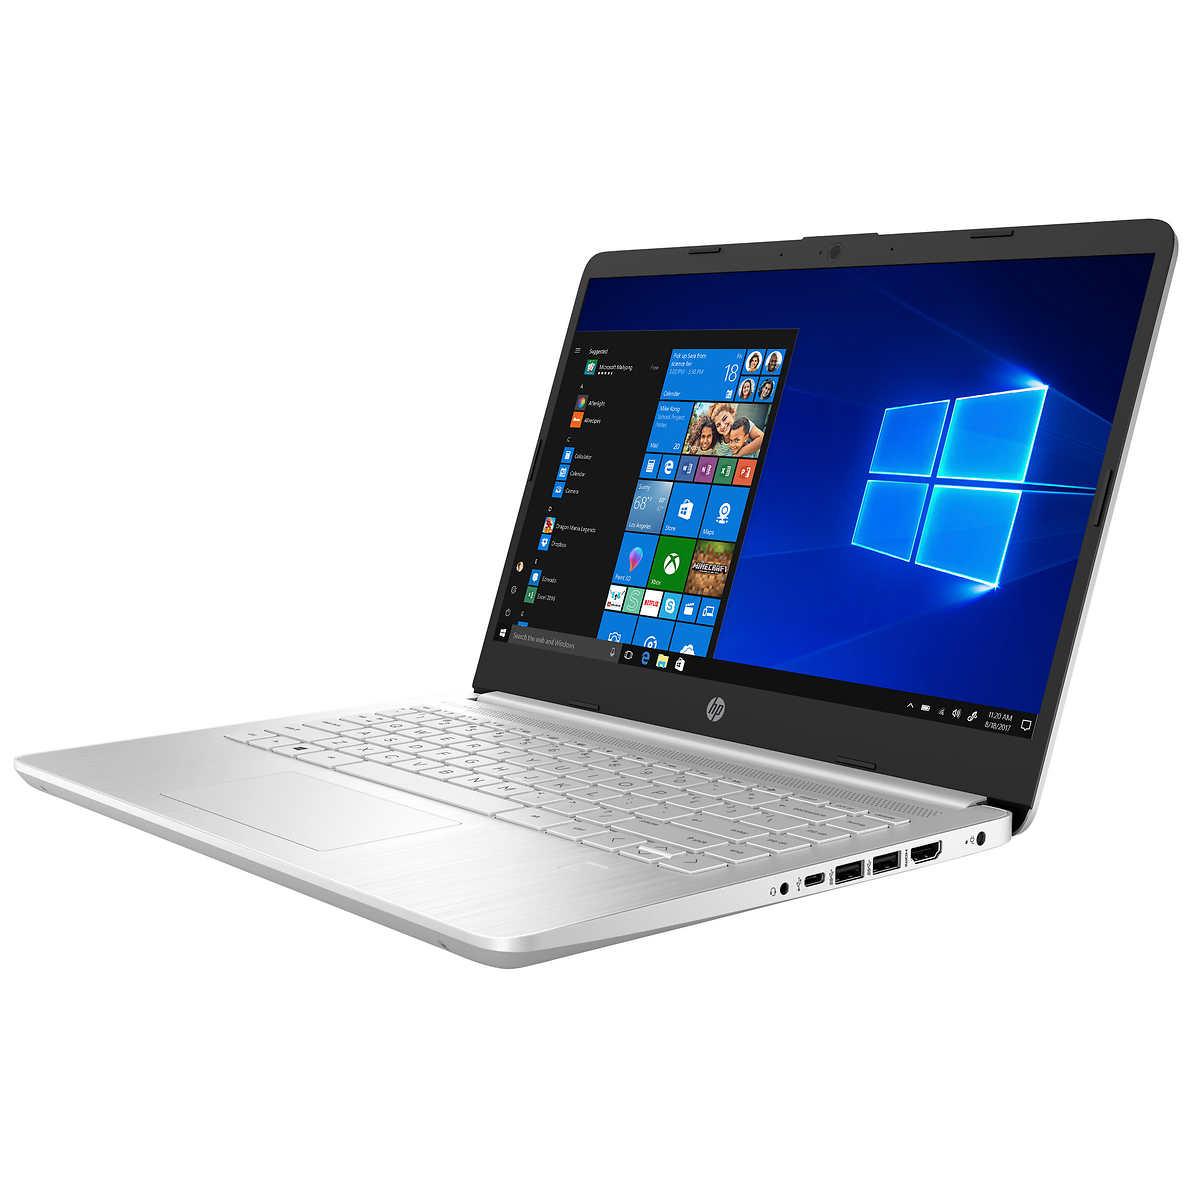 HP 14in i3 8GB 256GB Notebook Laptop for $389.98 Shipped